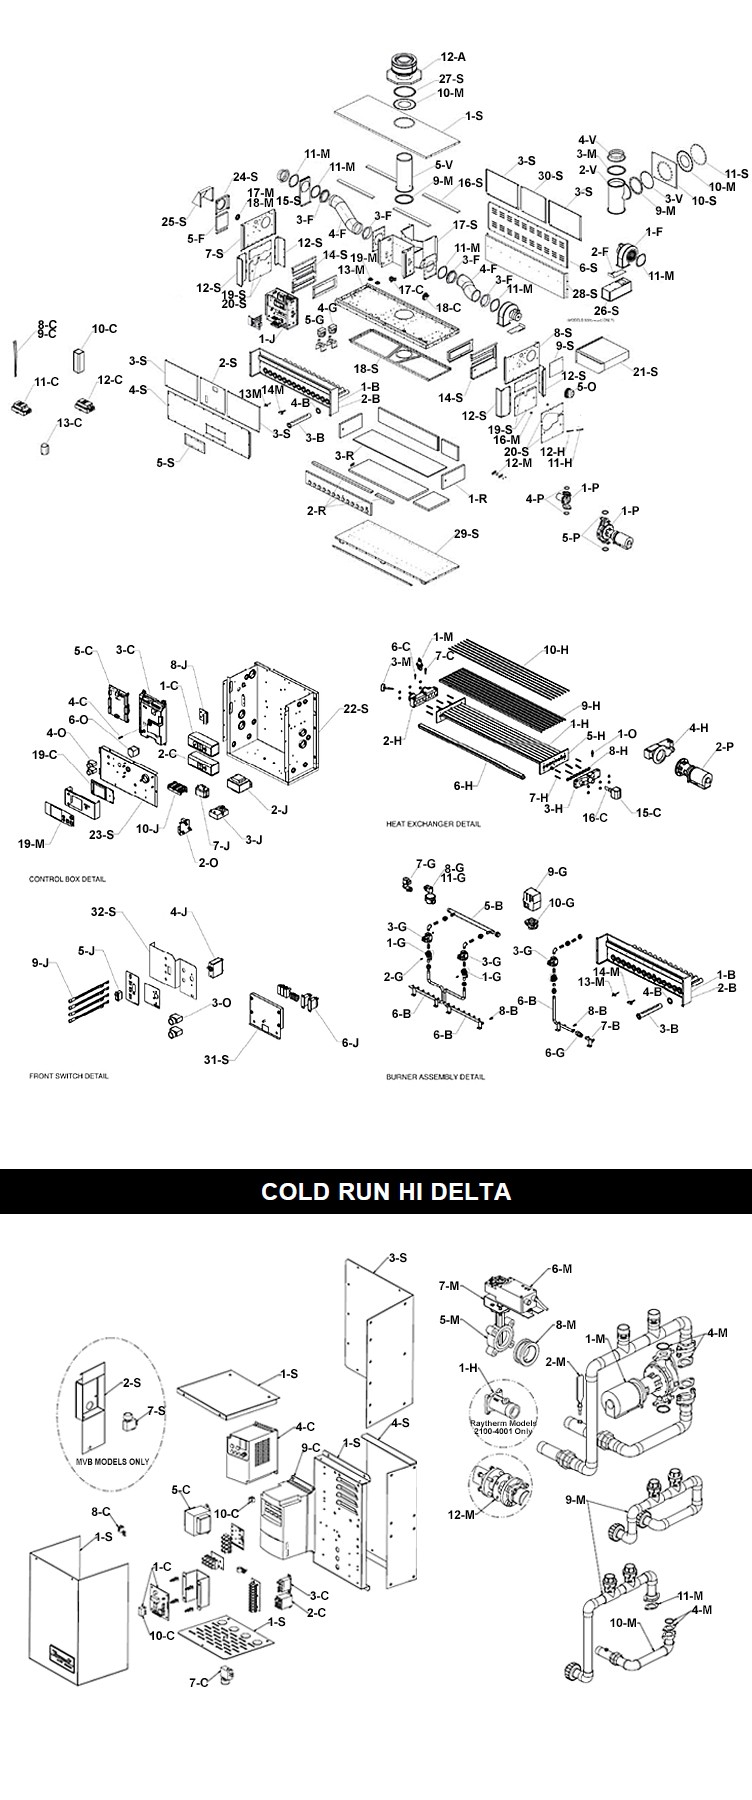 Raypak HI Delta Cold Run P-652C Commercial Indoor-Outdoor Swimming Pool Heater | Natural Gas 650,000 BTUH | 016085 Parts Schematic